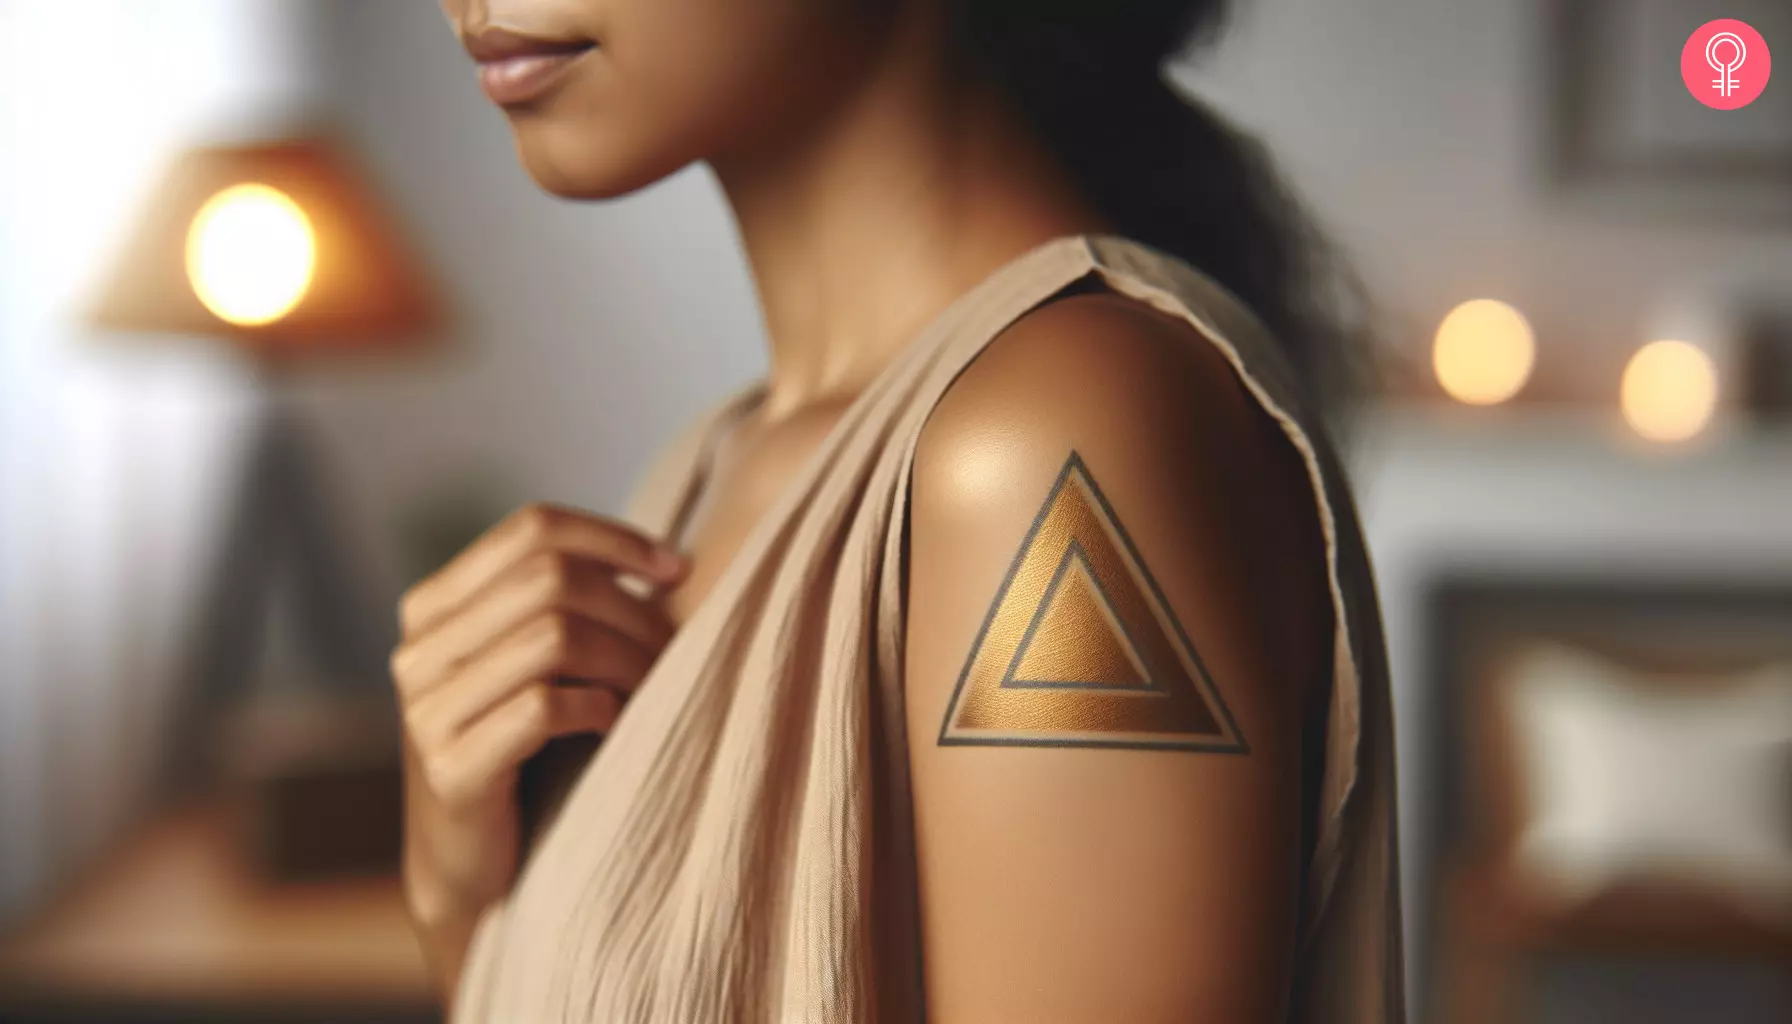 A woman with a golden triangle tattoo on her upper arm